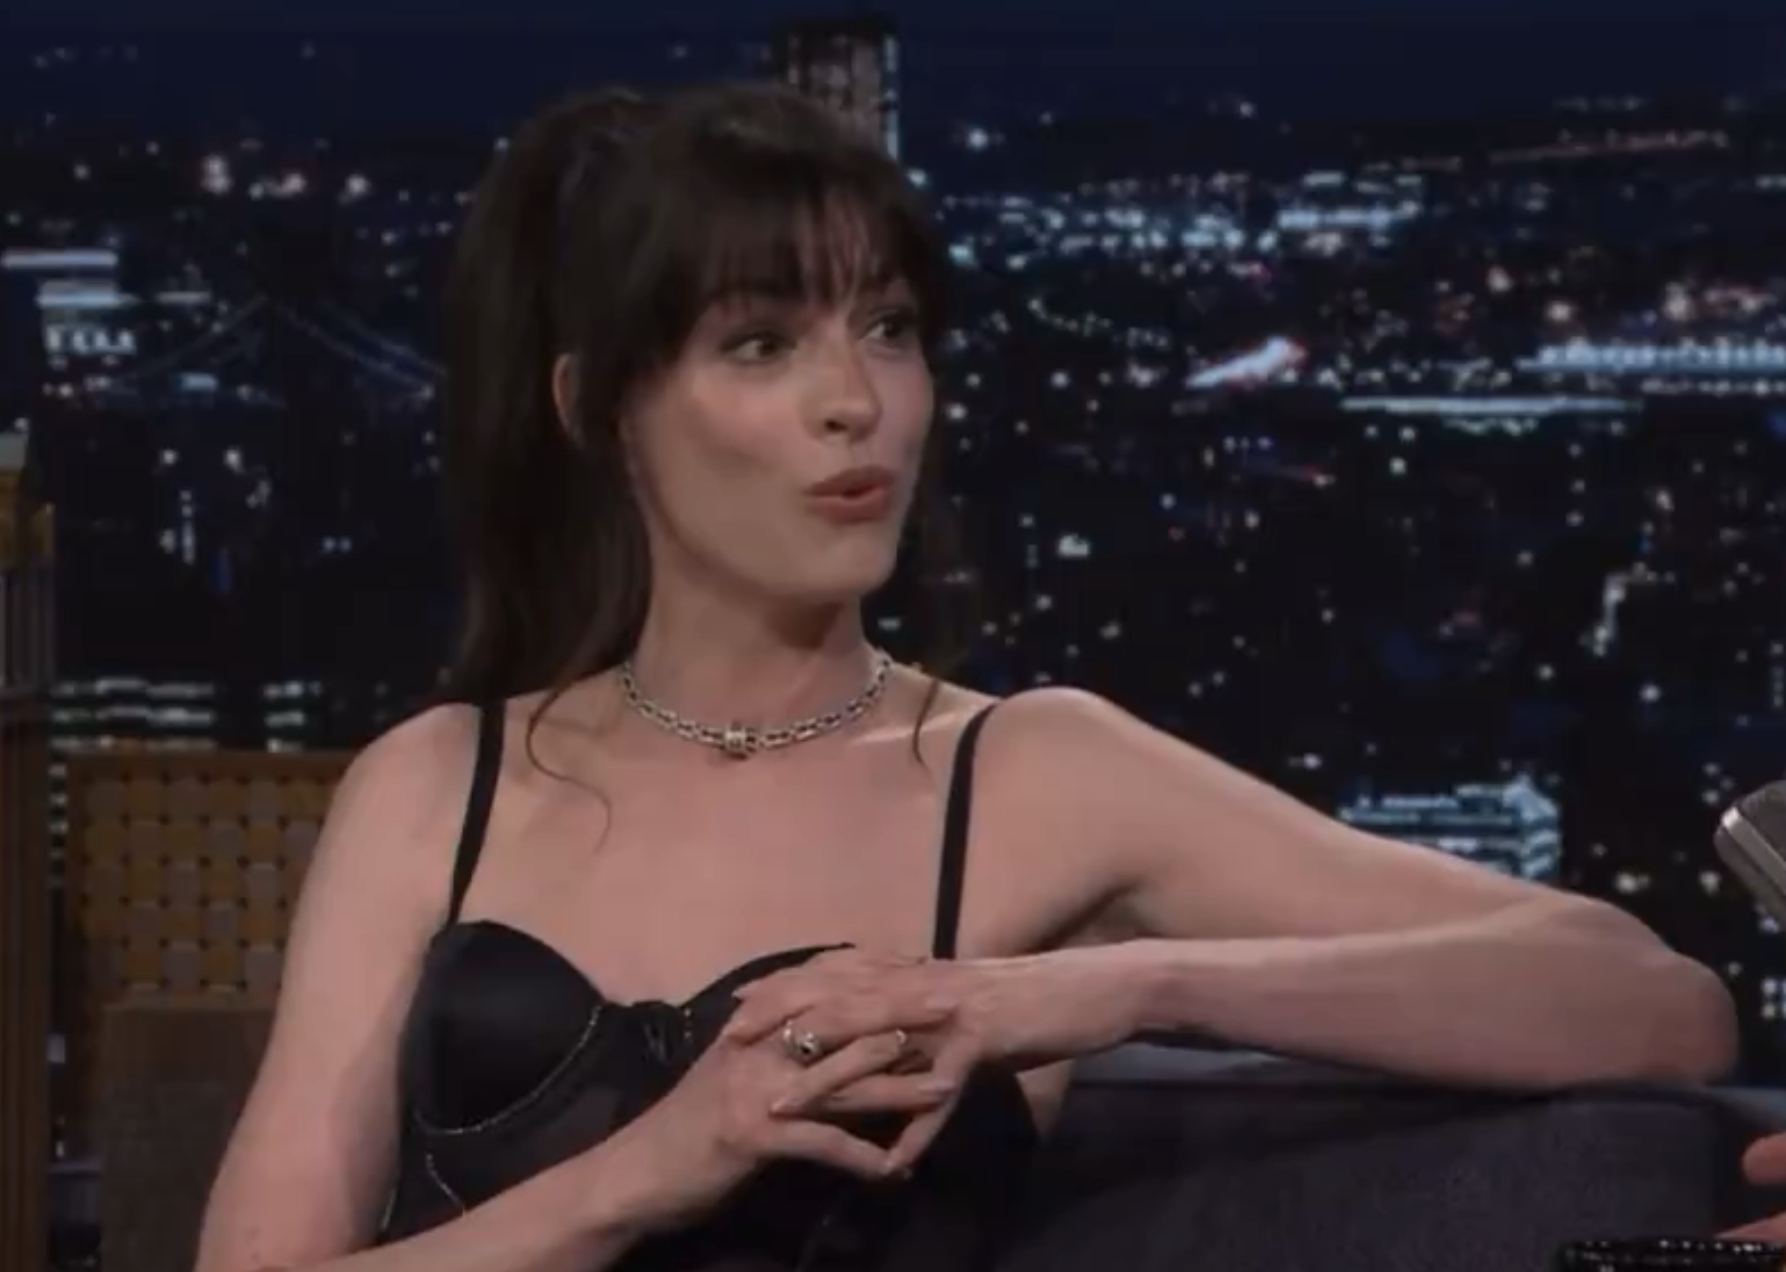 Anne Hathaway on the tonight show